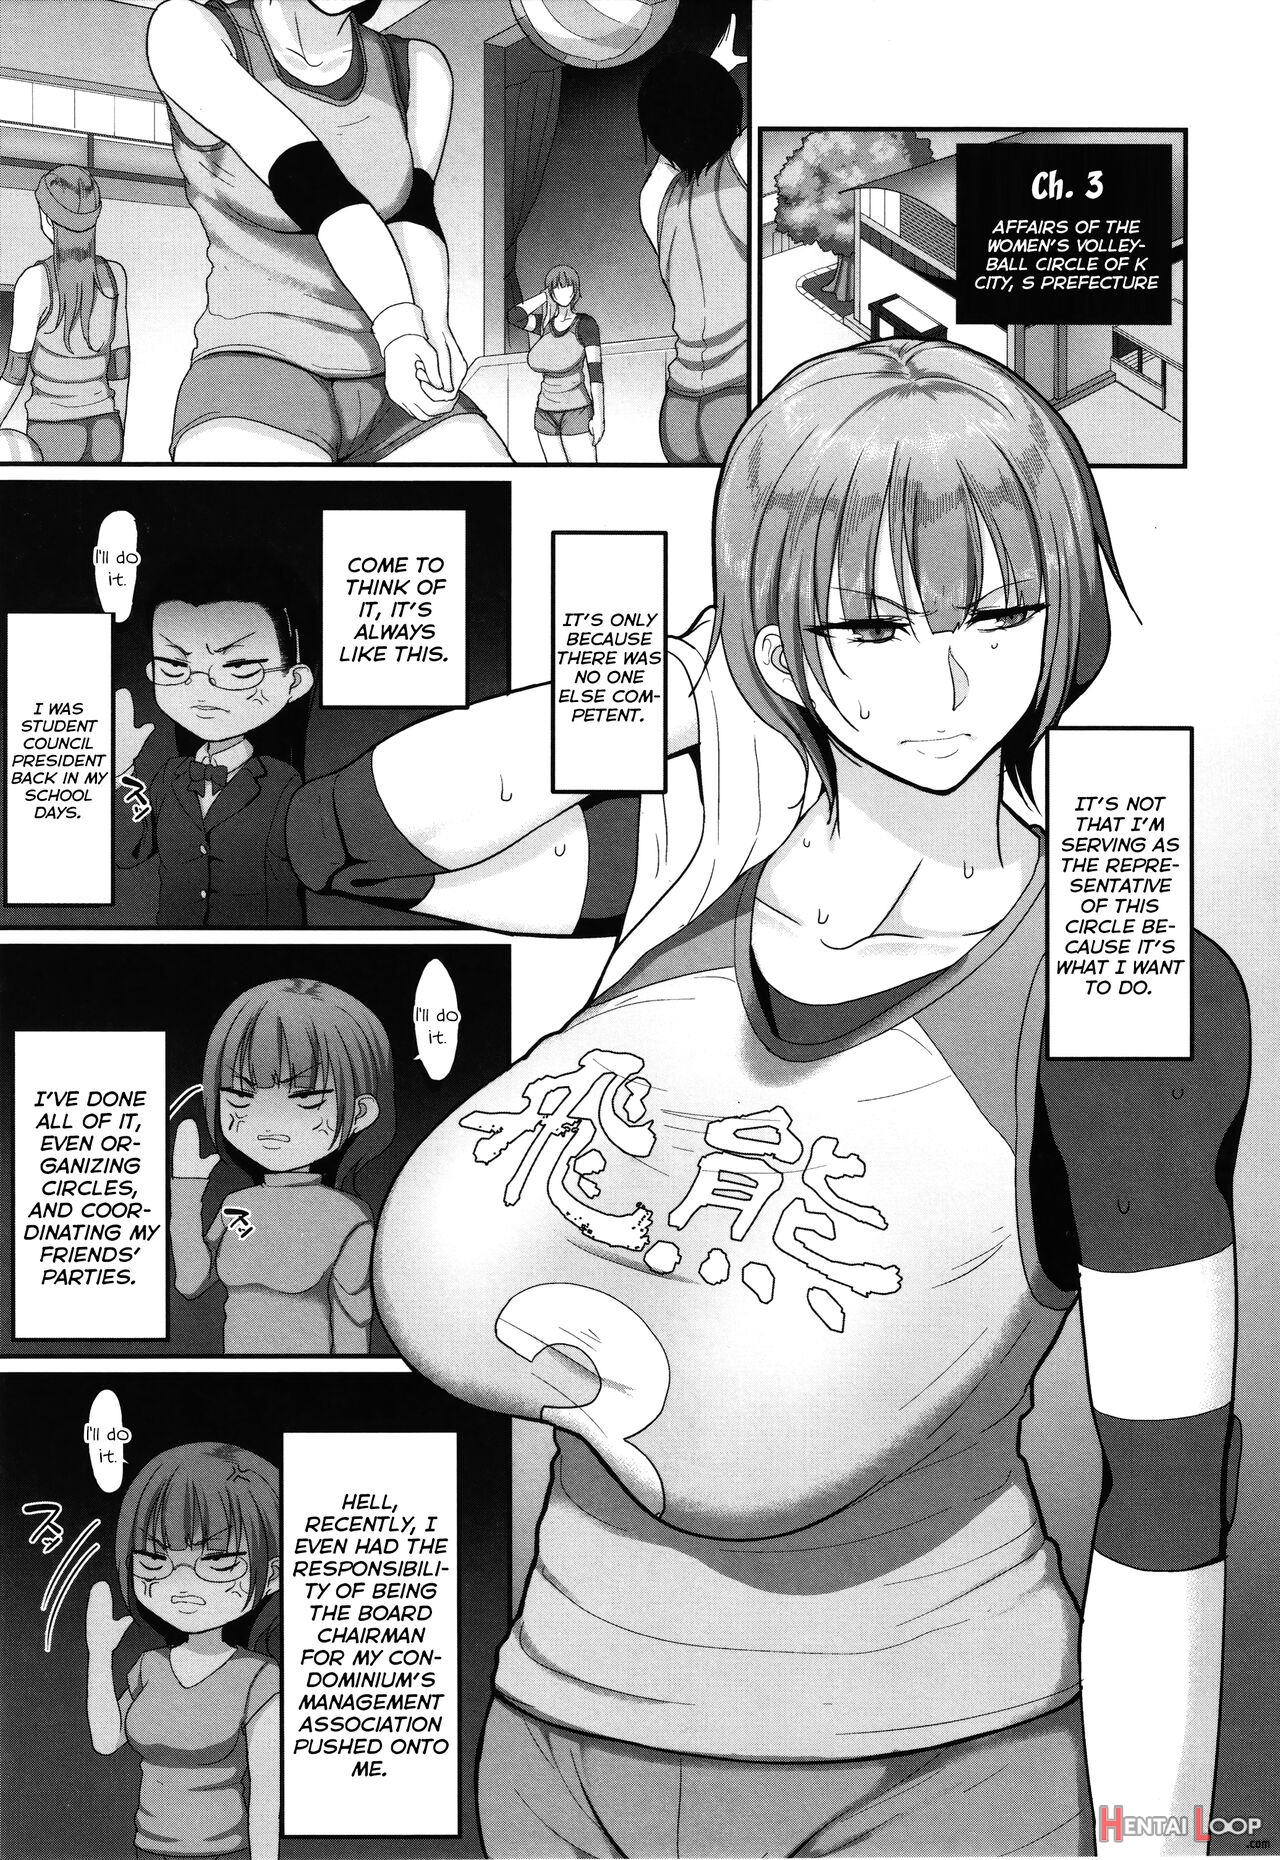 Affairs Of The Women's Volleyball Circle Of K City, S Prefecture 1 page 59